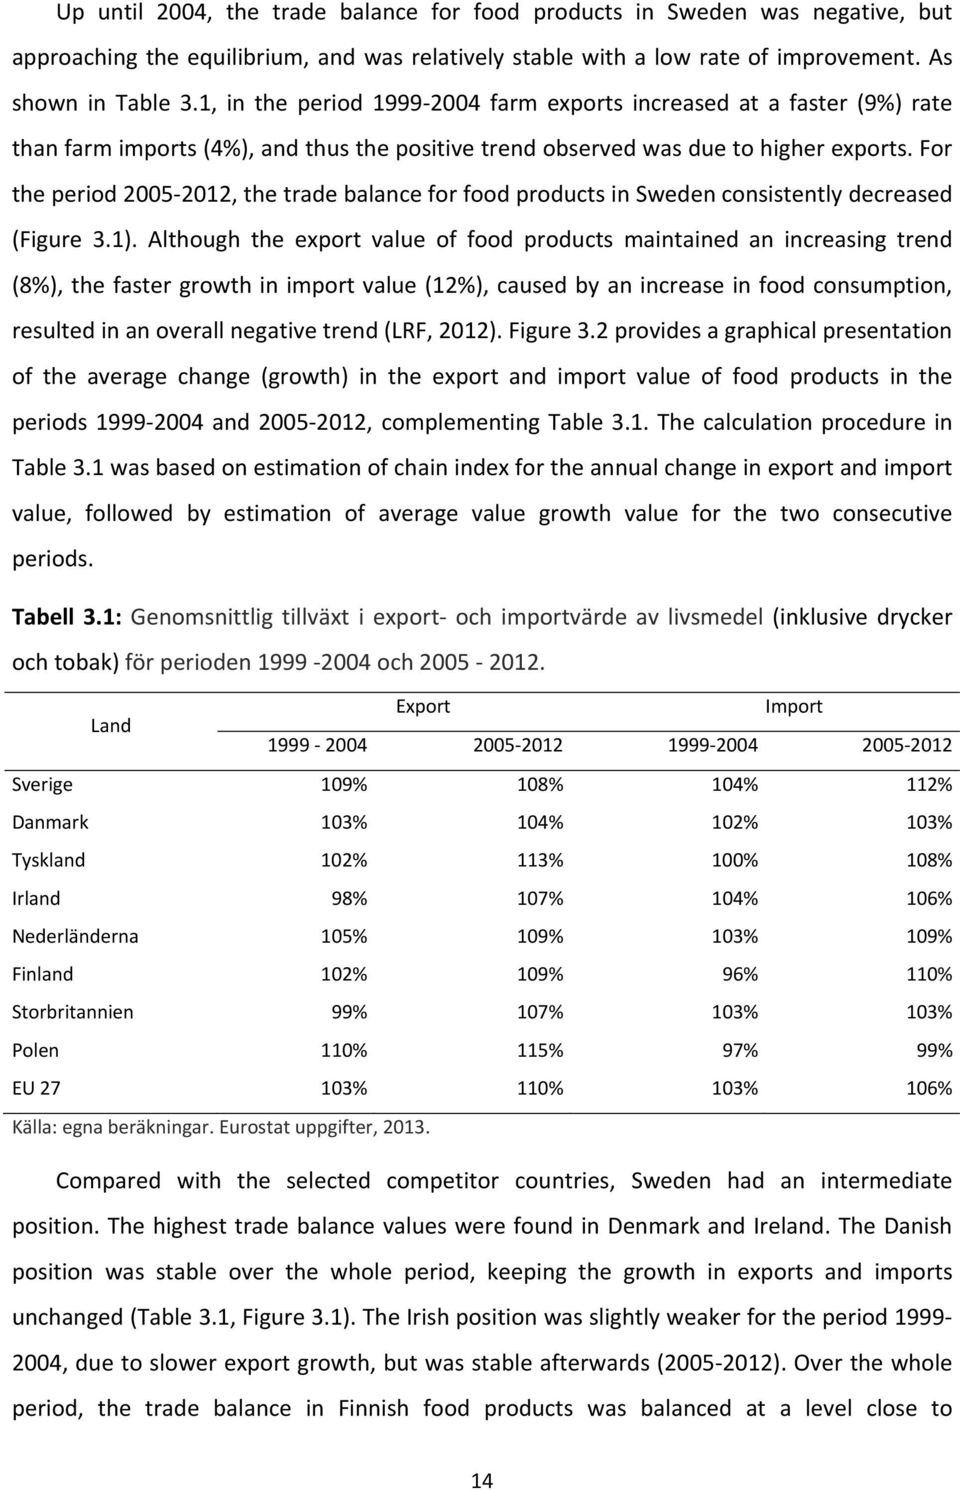 For the period 2005 2012, the trade balance for food products in Sweden consistently decreased (Figure 3.1).